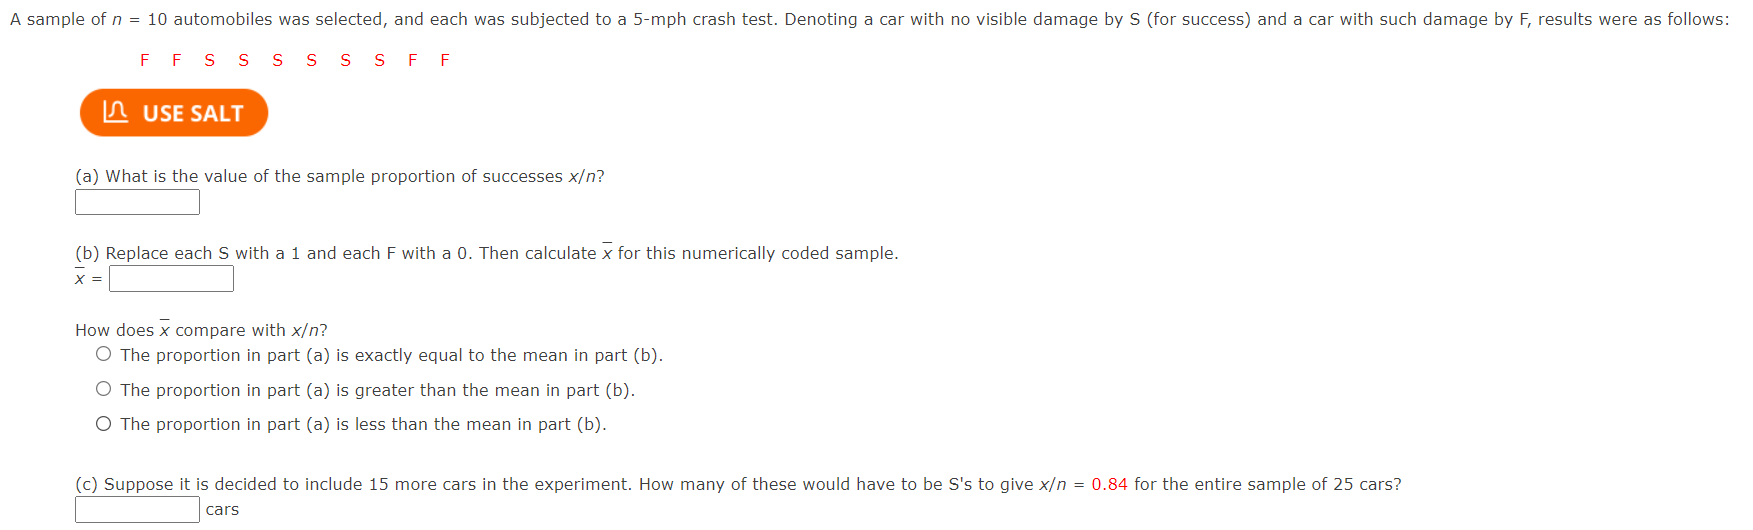 A Sample Of N 10 Automobiles Was Selected And Each Was Subjected To A 5 Mph Crash Test Denoting A Car With No Visibl 1